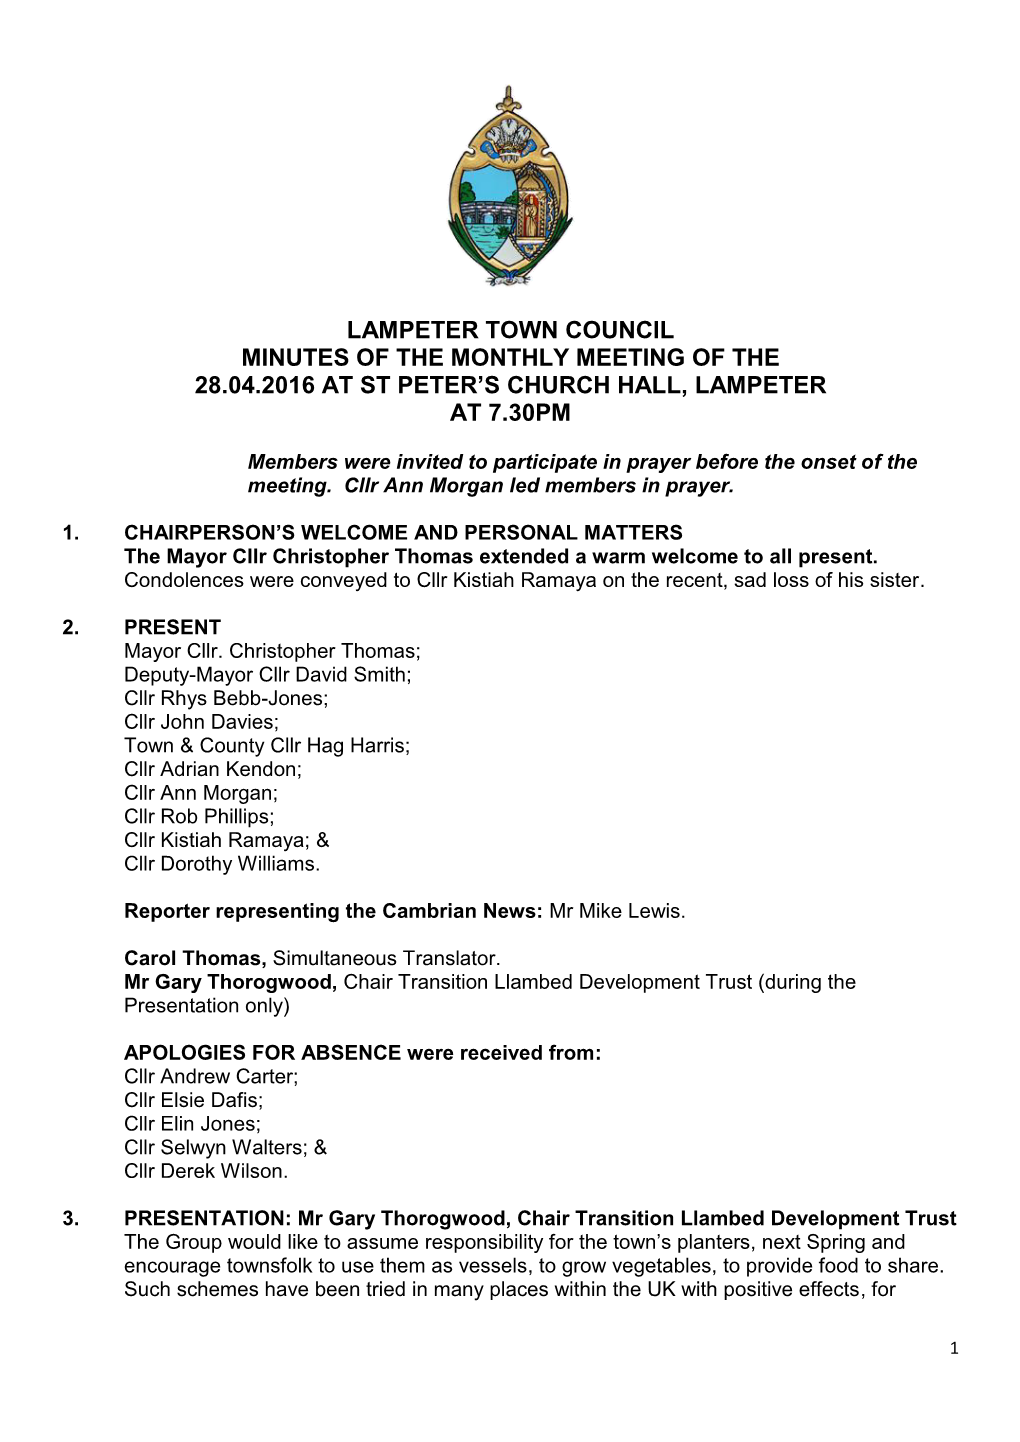 Lampeter Town Council Minutes of the Monthly Meeting of the 28.04.2016 at St Peter’S Church Hall, Lampeter at 7.30Pm